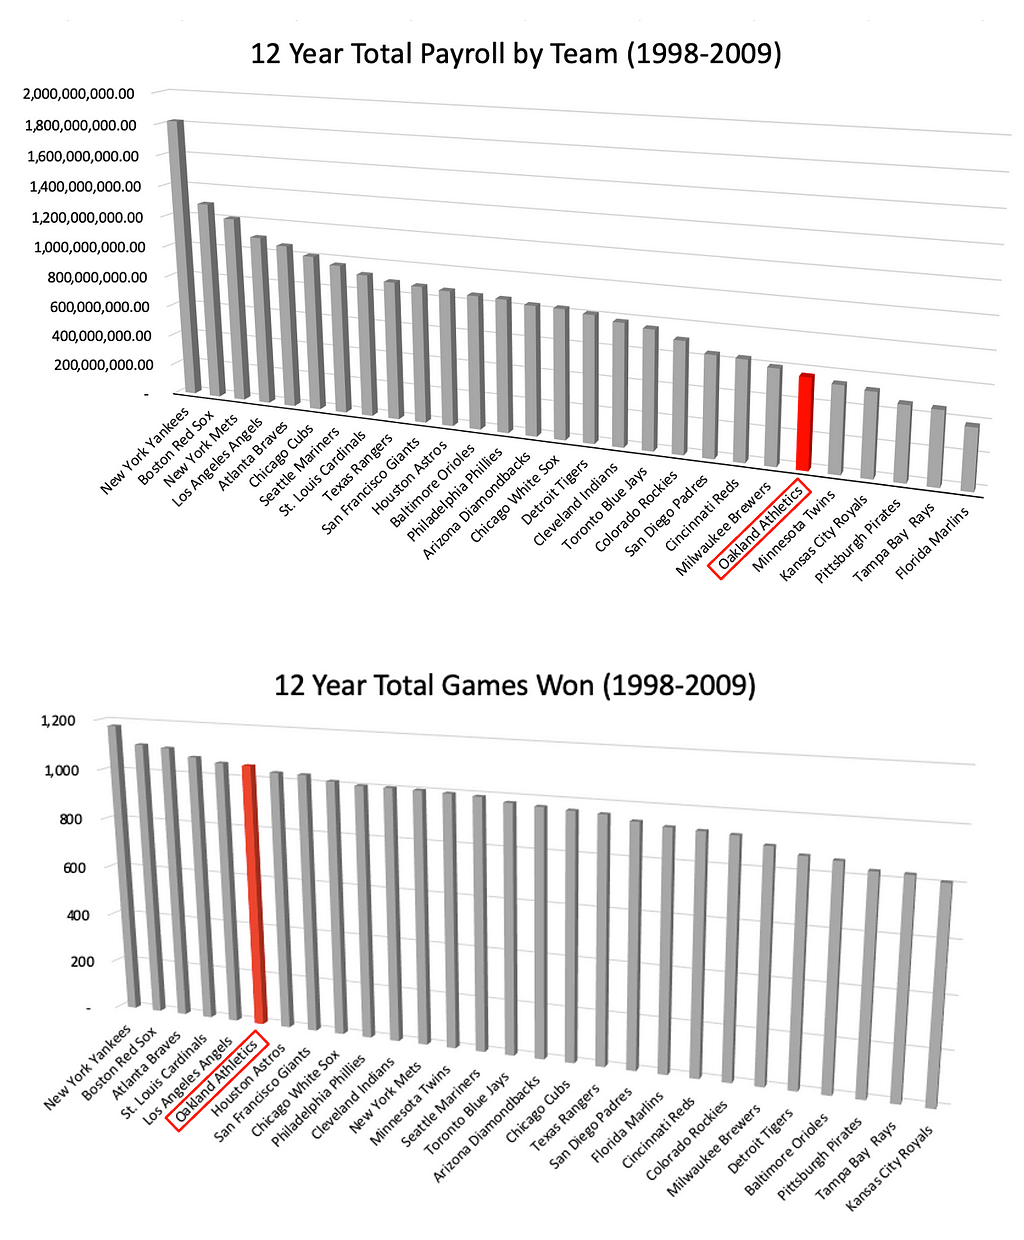 Charts showing total payroll over 12 year period (1998–2009) and total games won over same period for every major league baseball team. The Oakland A’s had the 6th LOWEST payroll over that period but 6th most wins. No other team had that contrast in low payroll and games won.